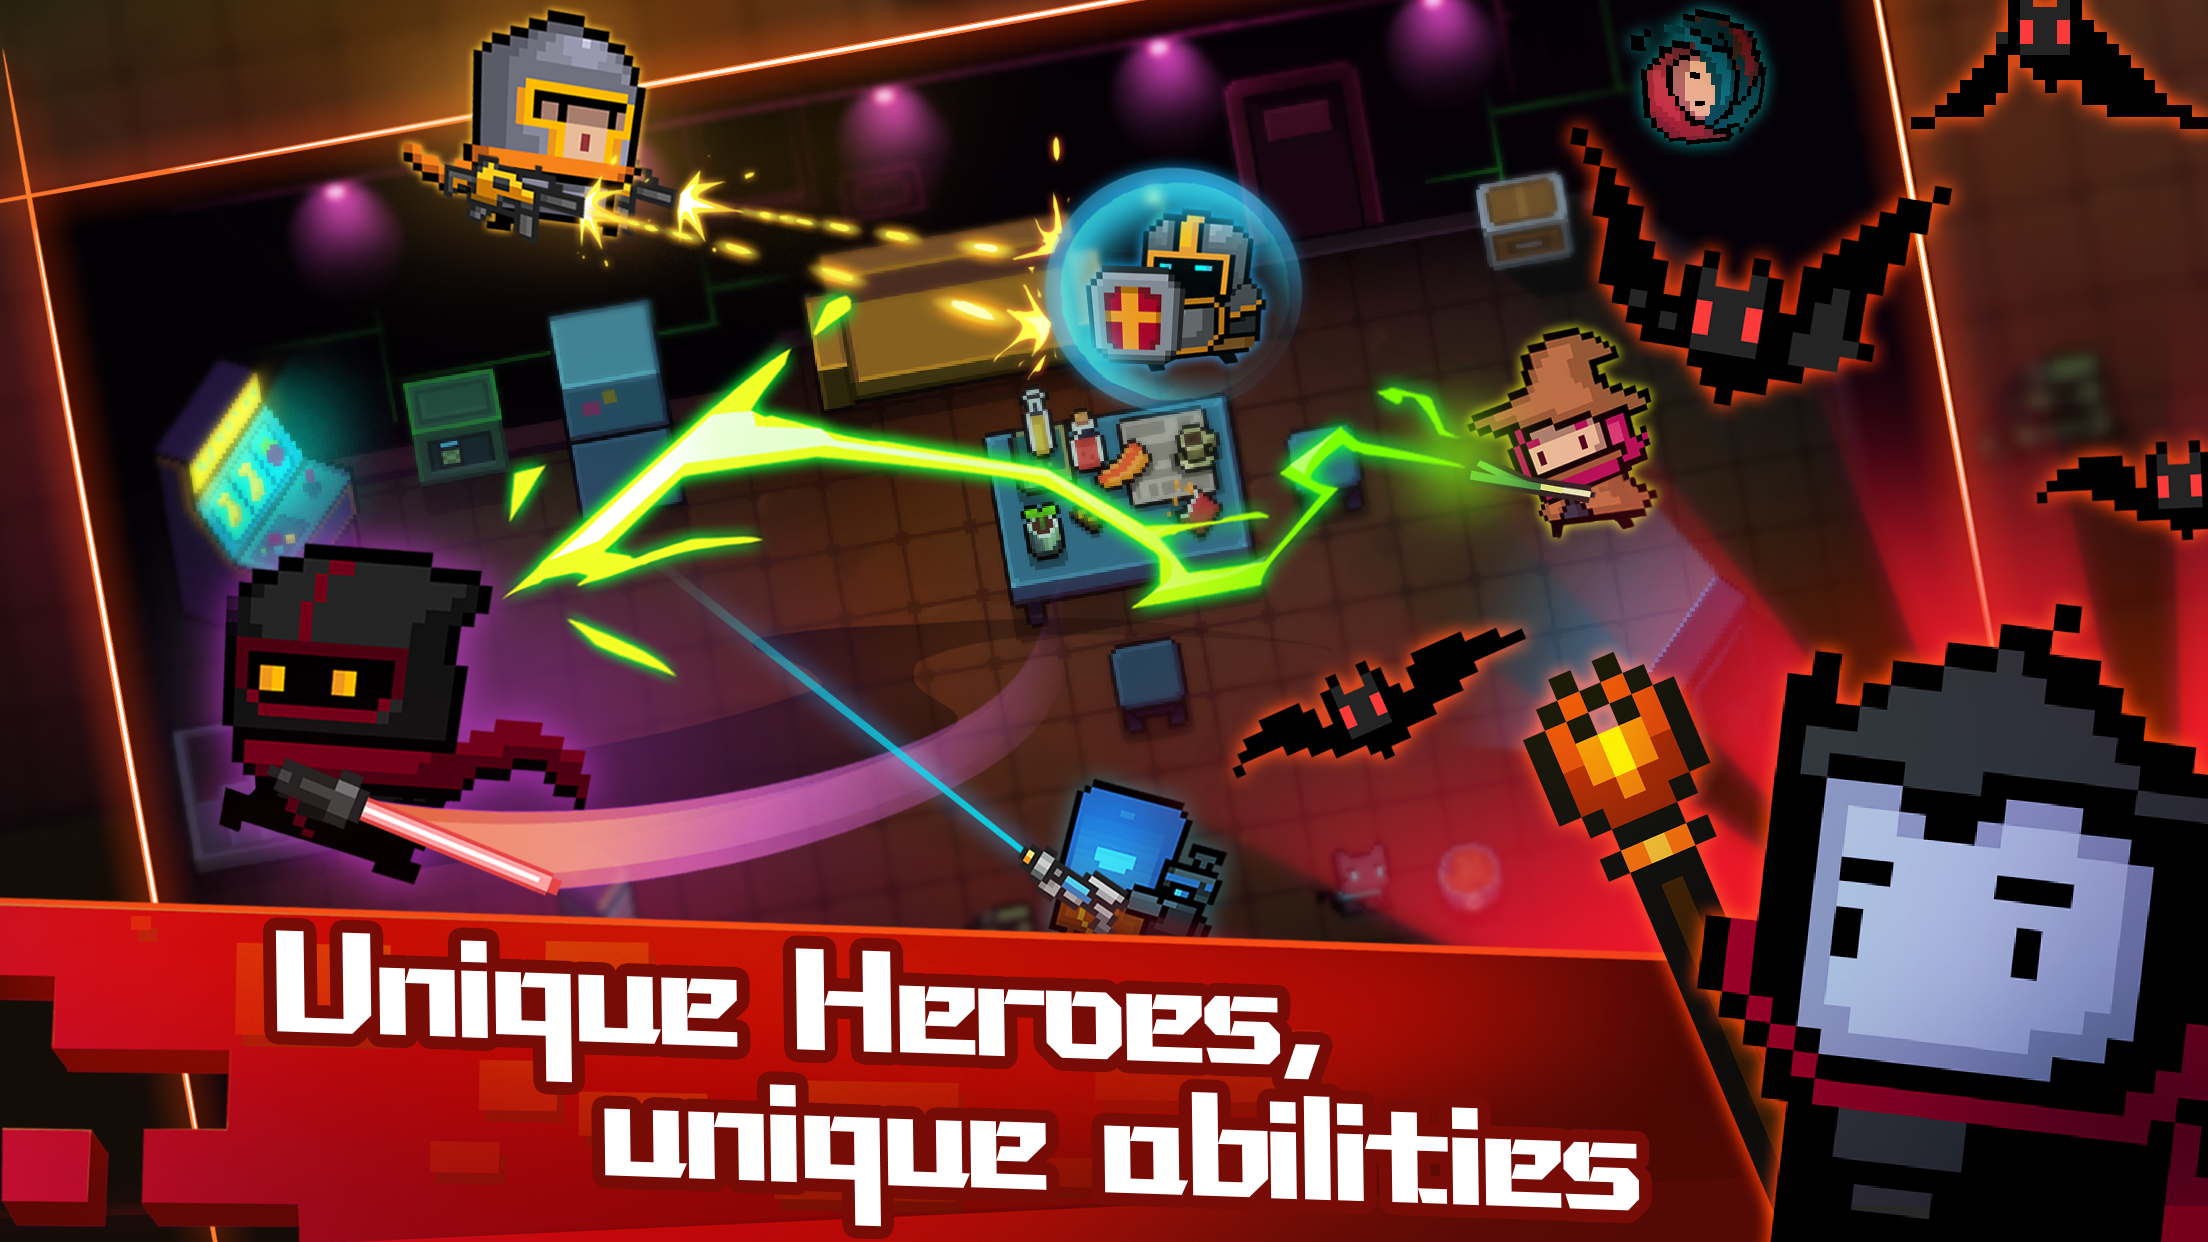 Soul Knight for Android - APK Download - 